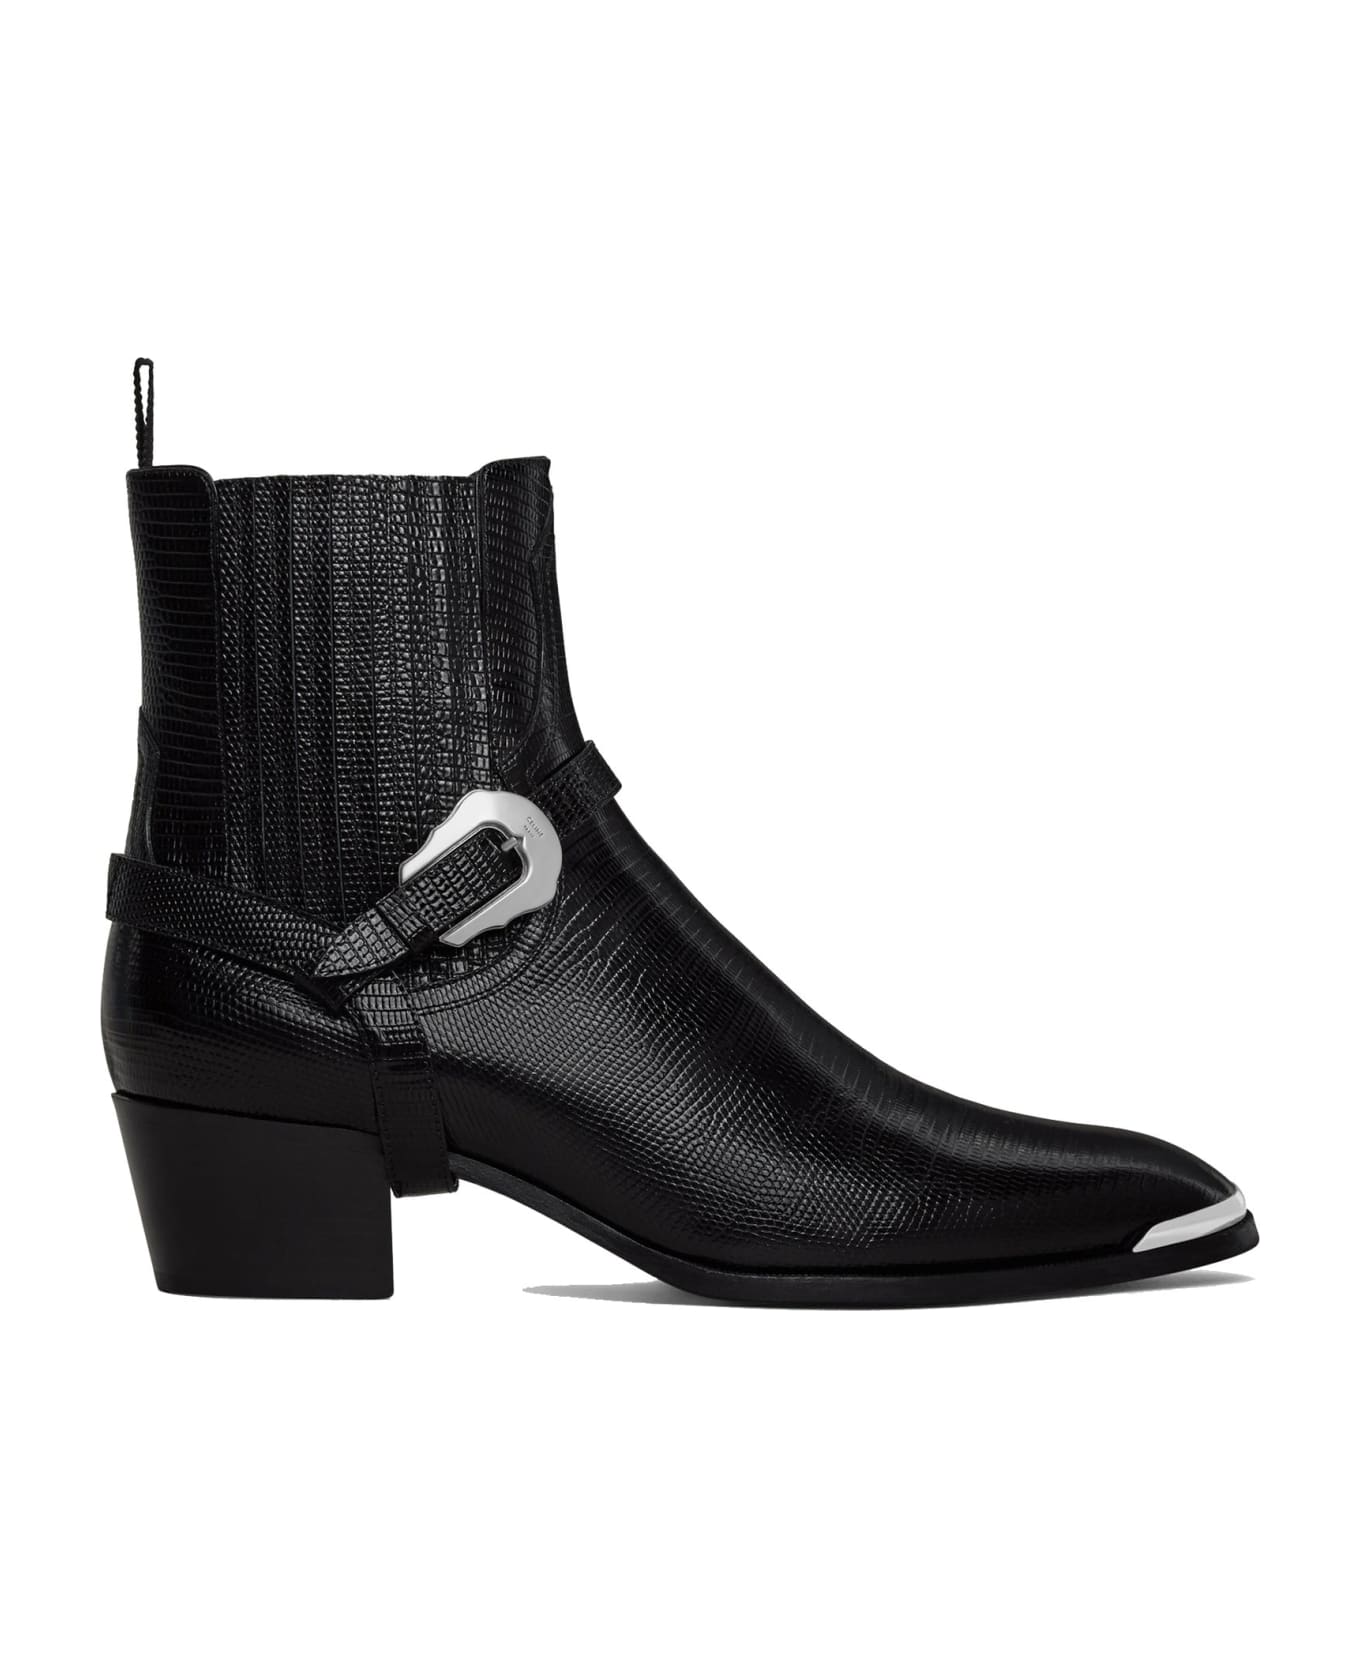 Celine Western Chelsea Isaac Harness Boots - Black ブーツ